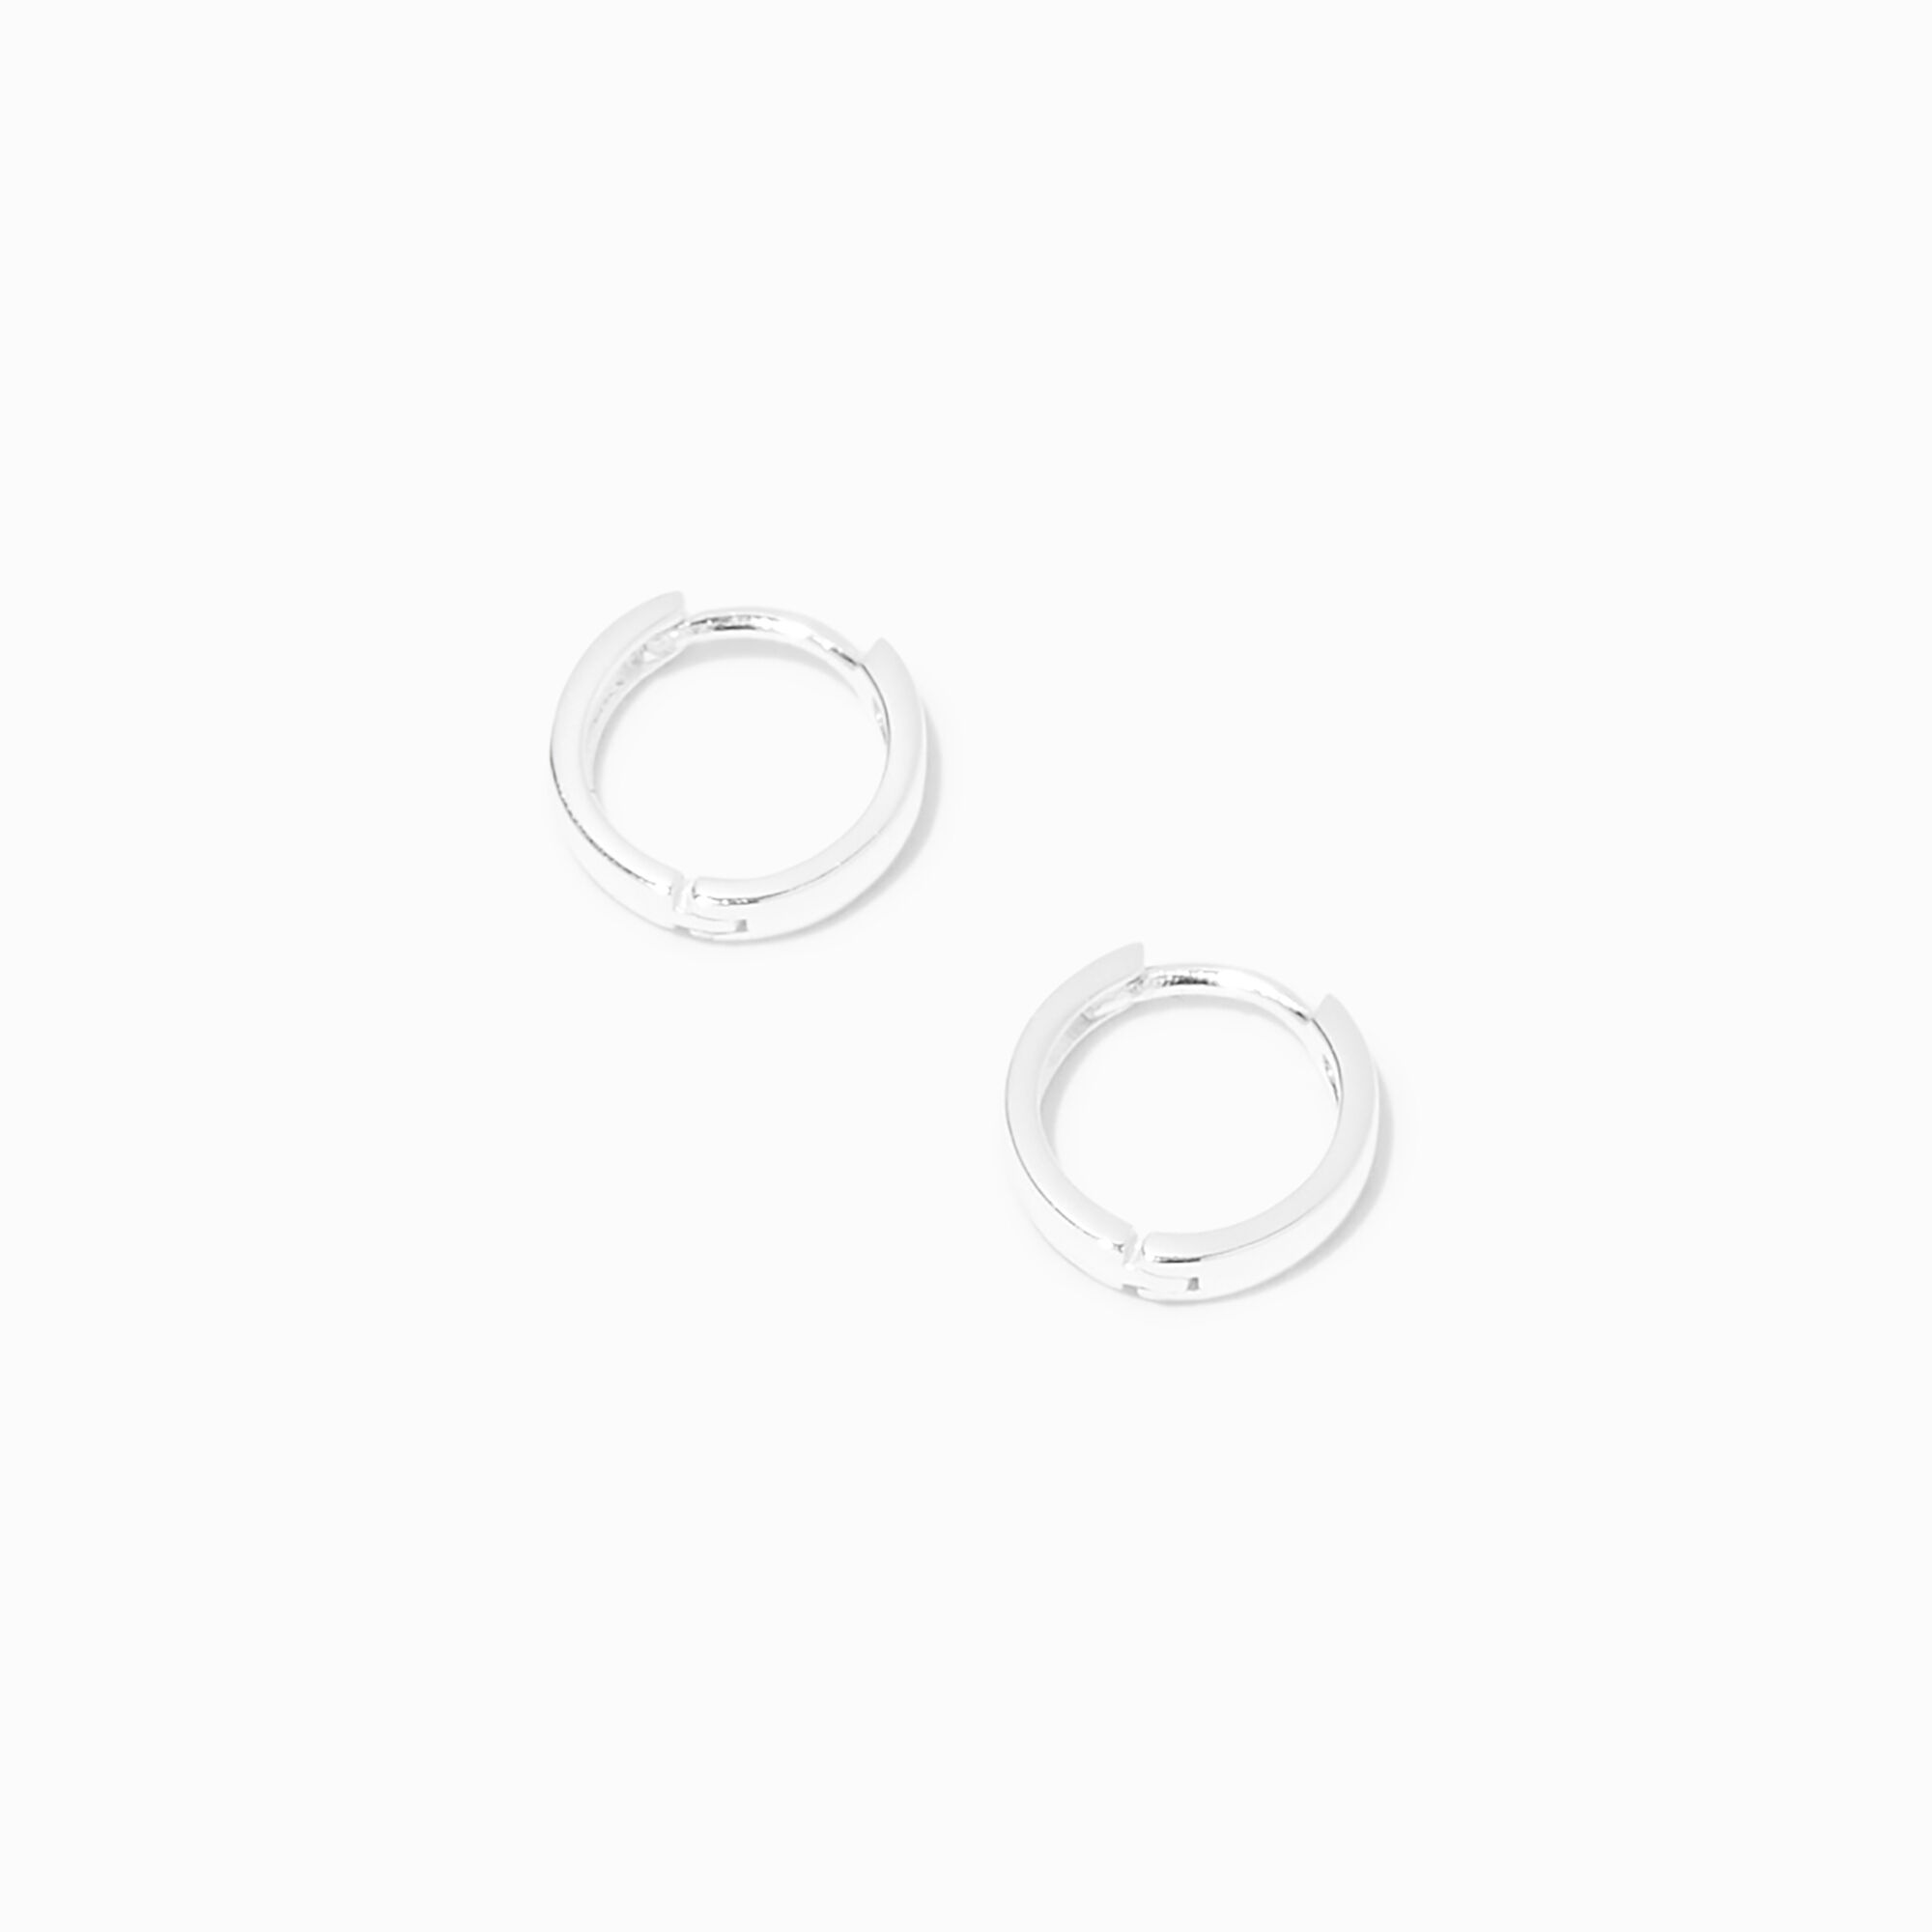 View C Luxe By Claires 8MM Clicker Hoop Earrings Silver information